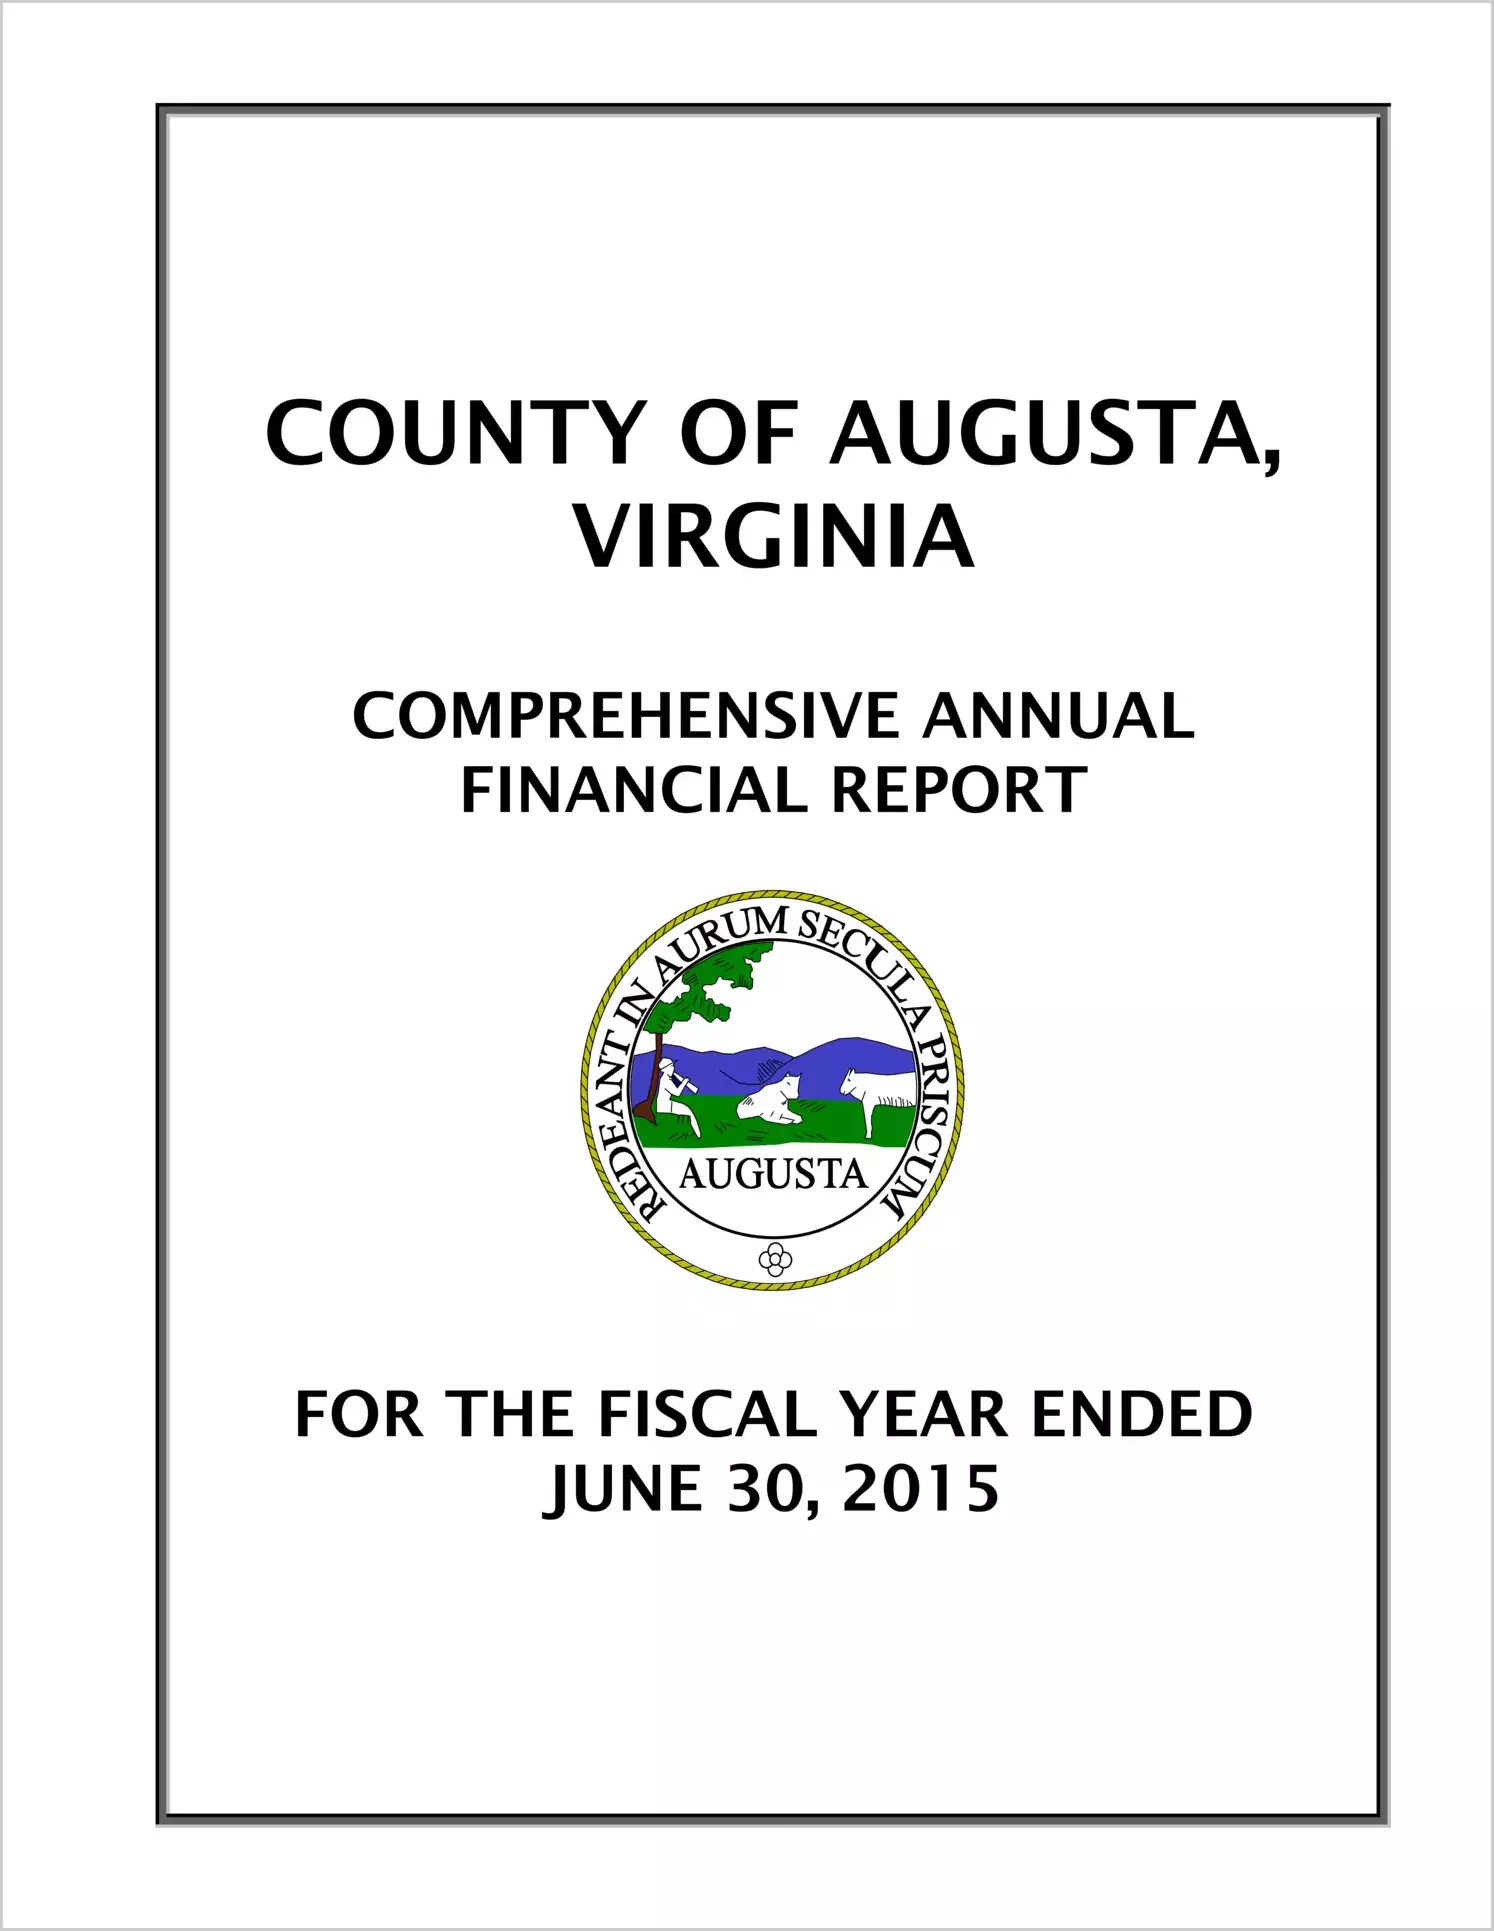 2015 Annual Financial Report for County of Augusta